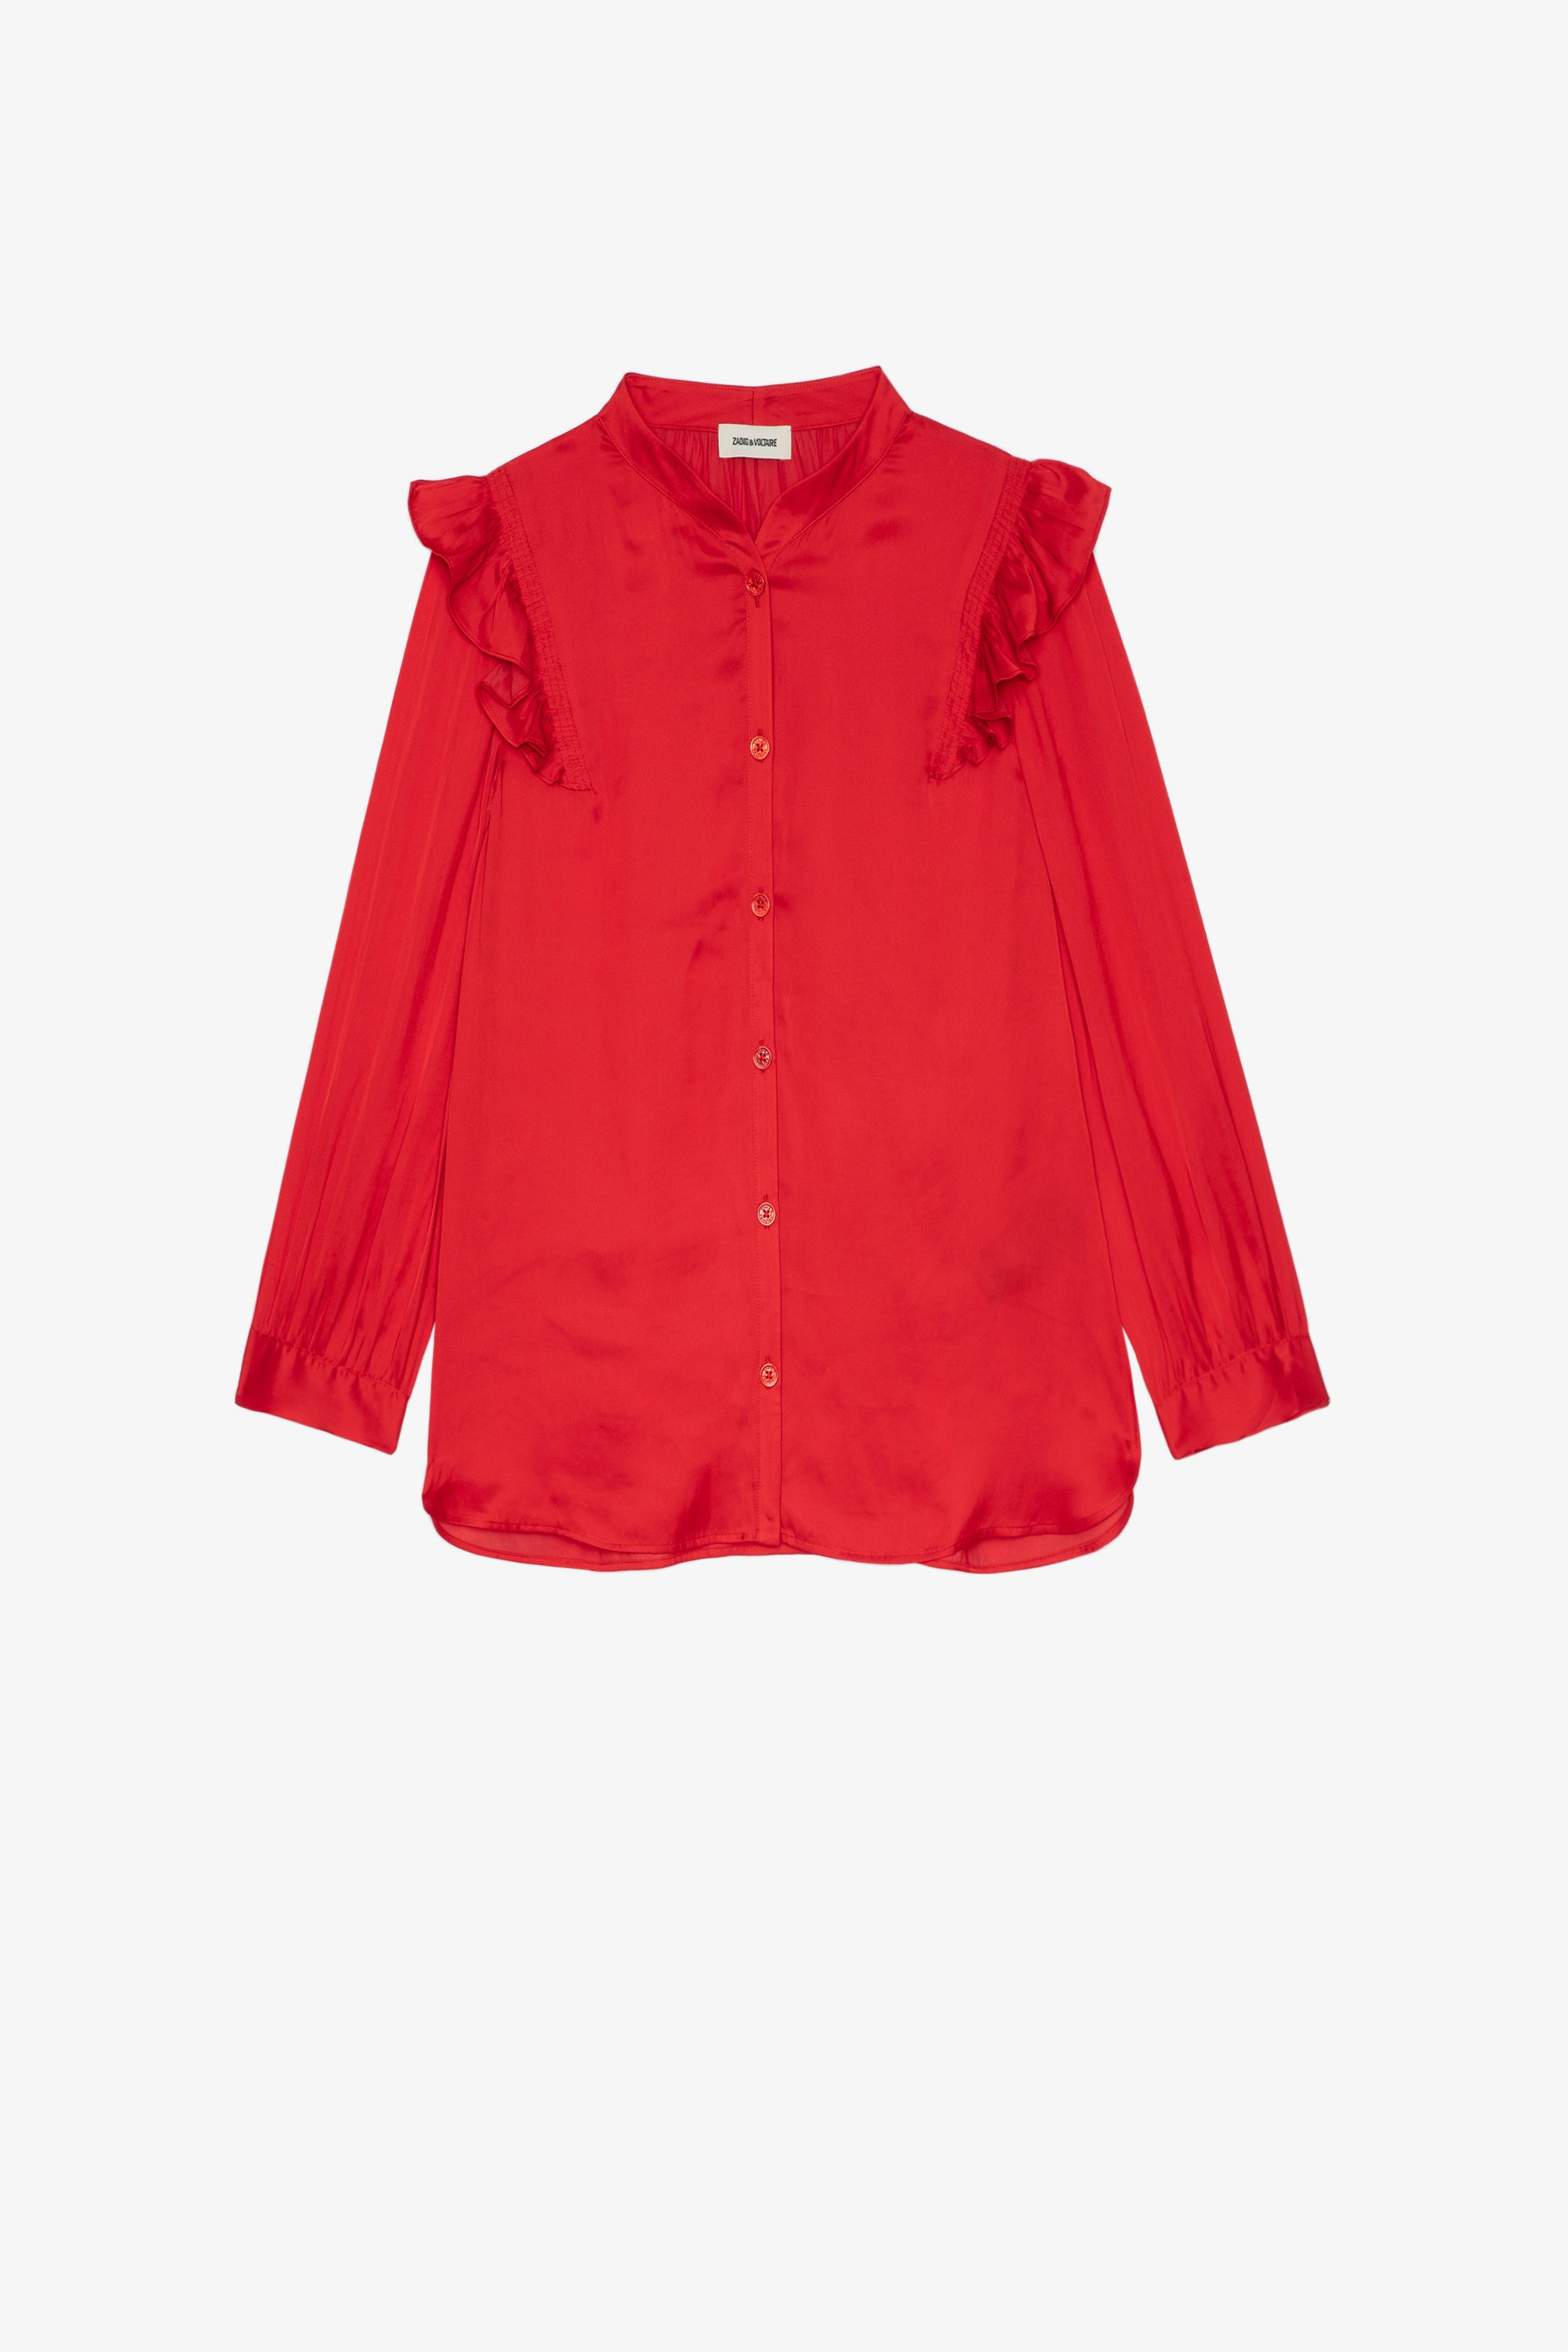 Tygg サテン シャツ Women’s red satiny shirt with long sleeves and ruffle details